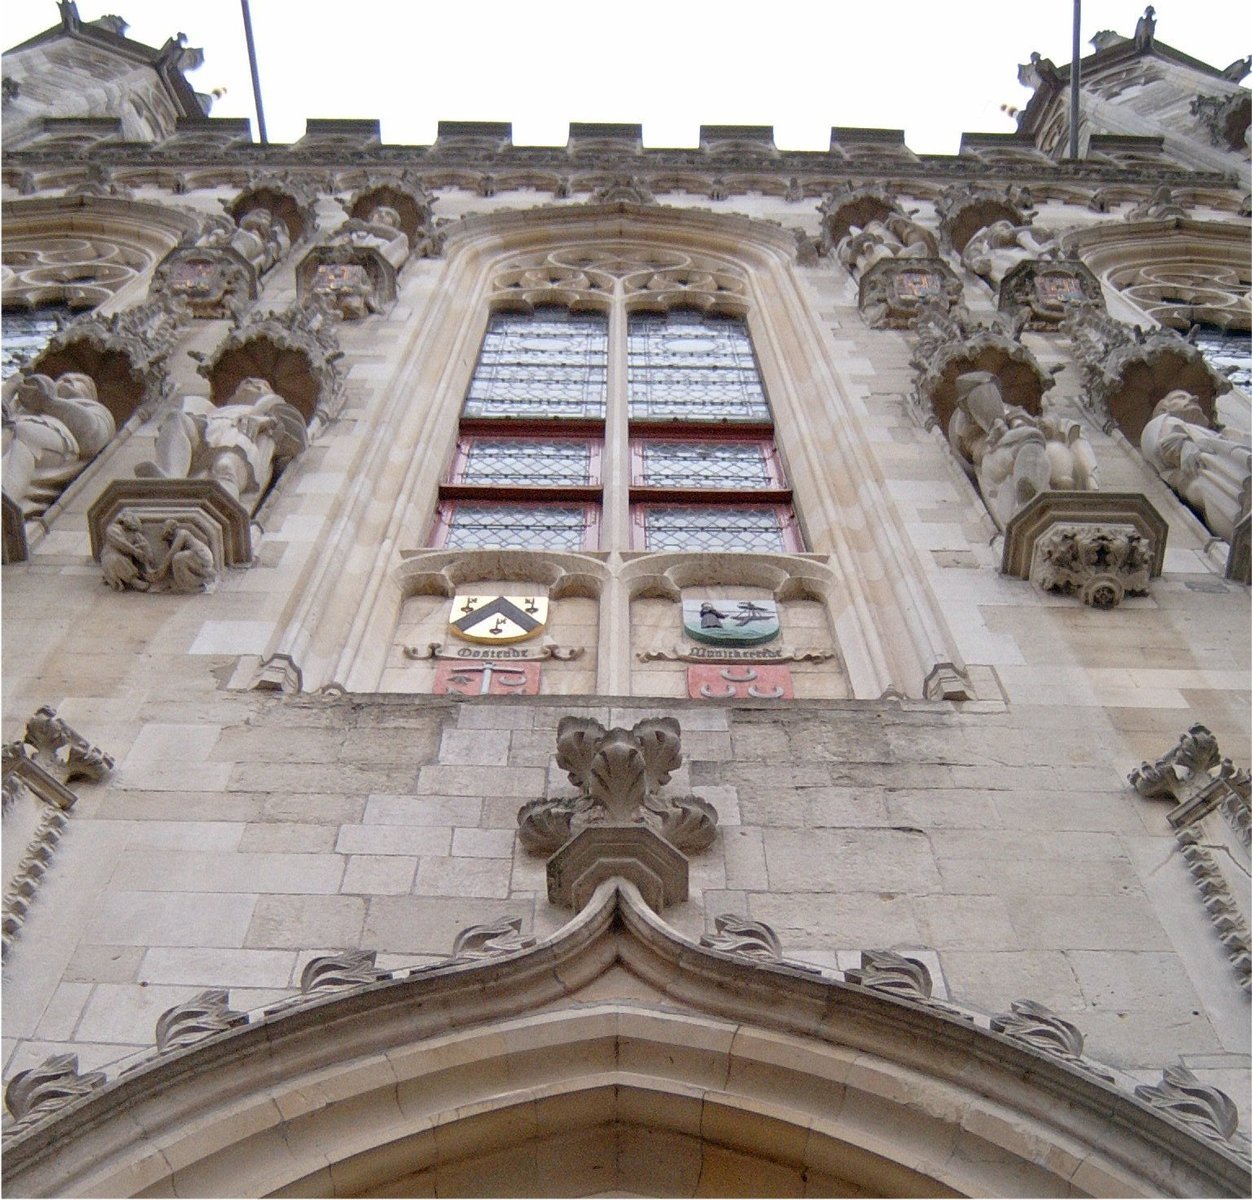 some statues are attached to a large building with a clock